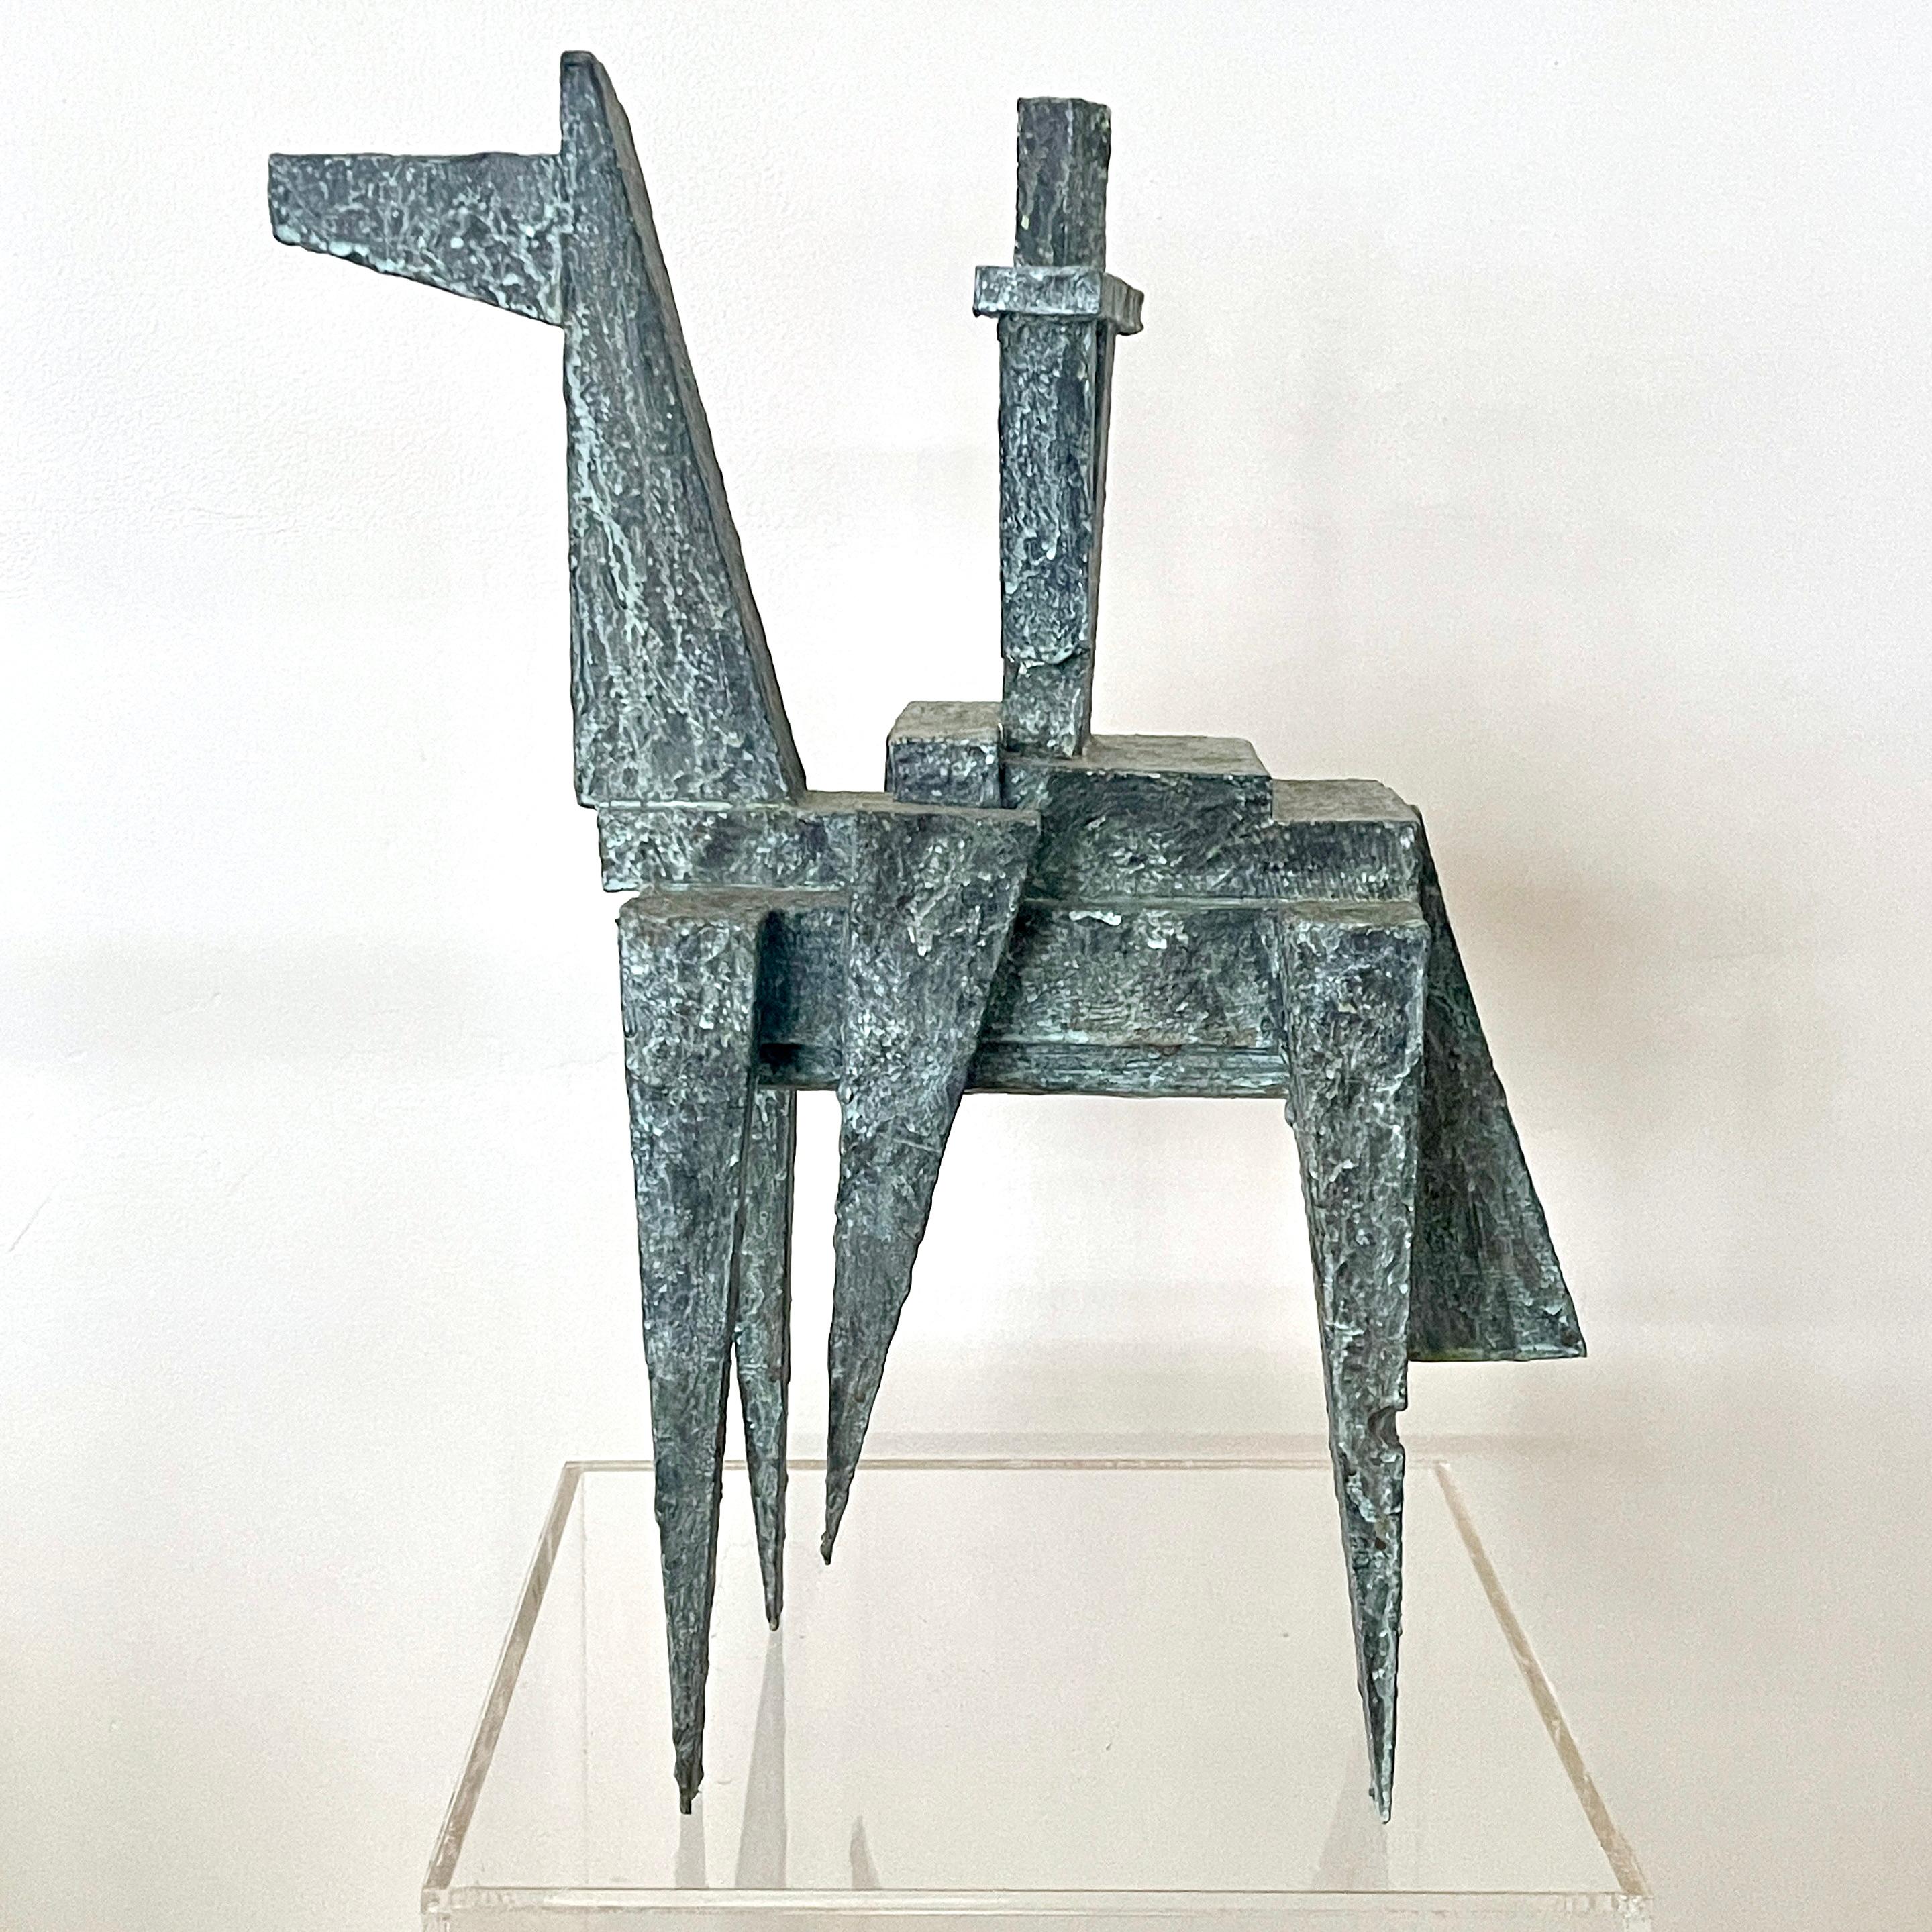 Modernist Cubist Sculpture by Bill Low with Weathered Bronze Finish For Sale 4